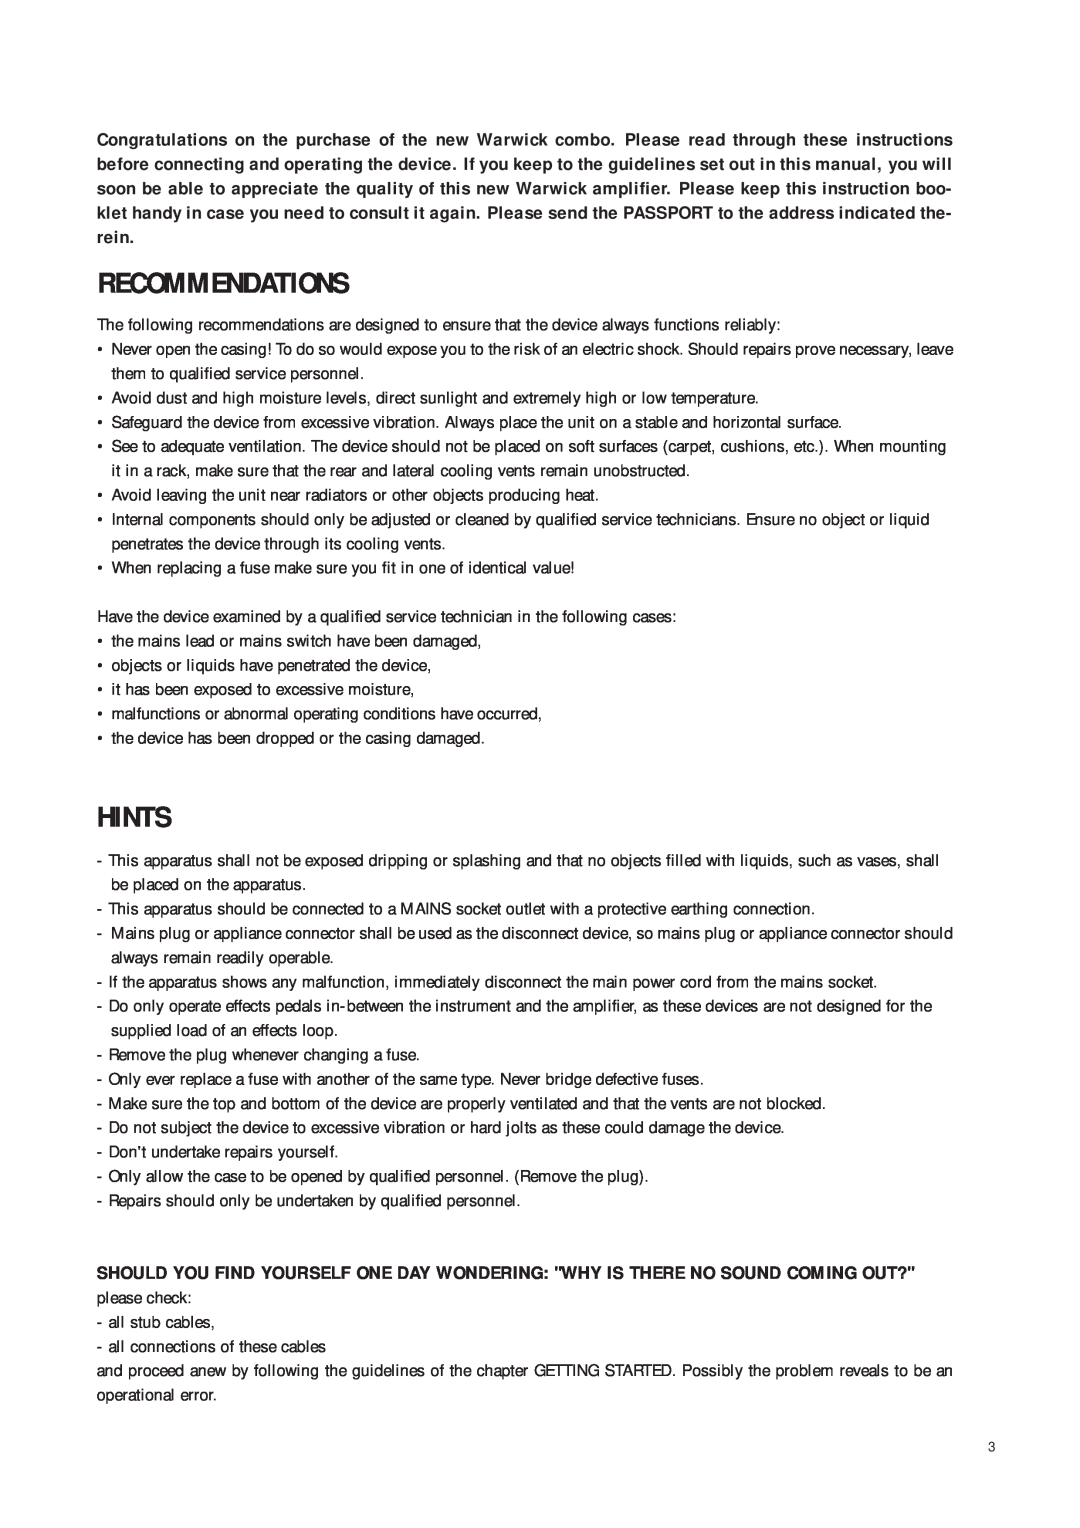 Warwick SUB III owner manual Recommendations, Hints 